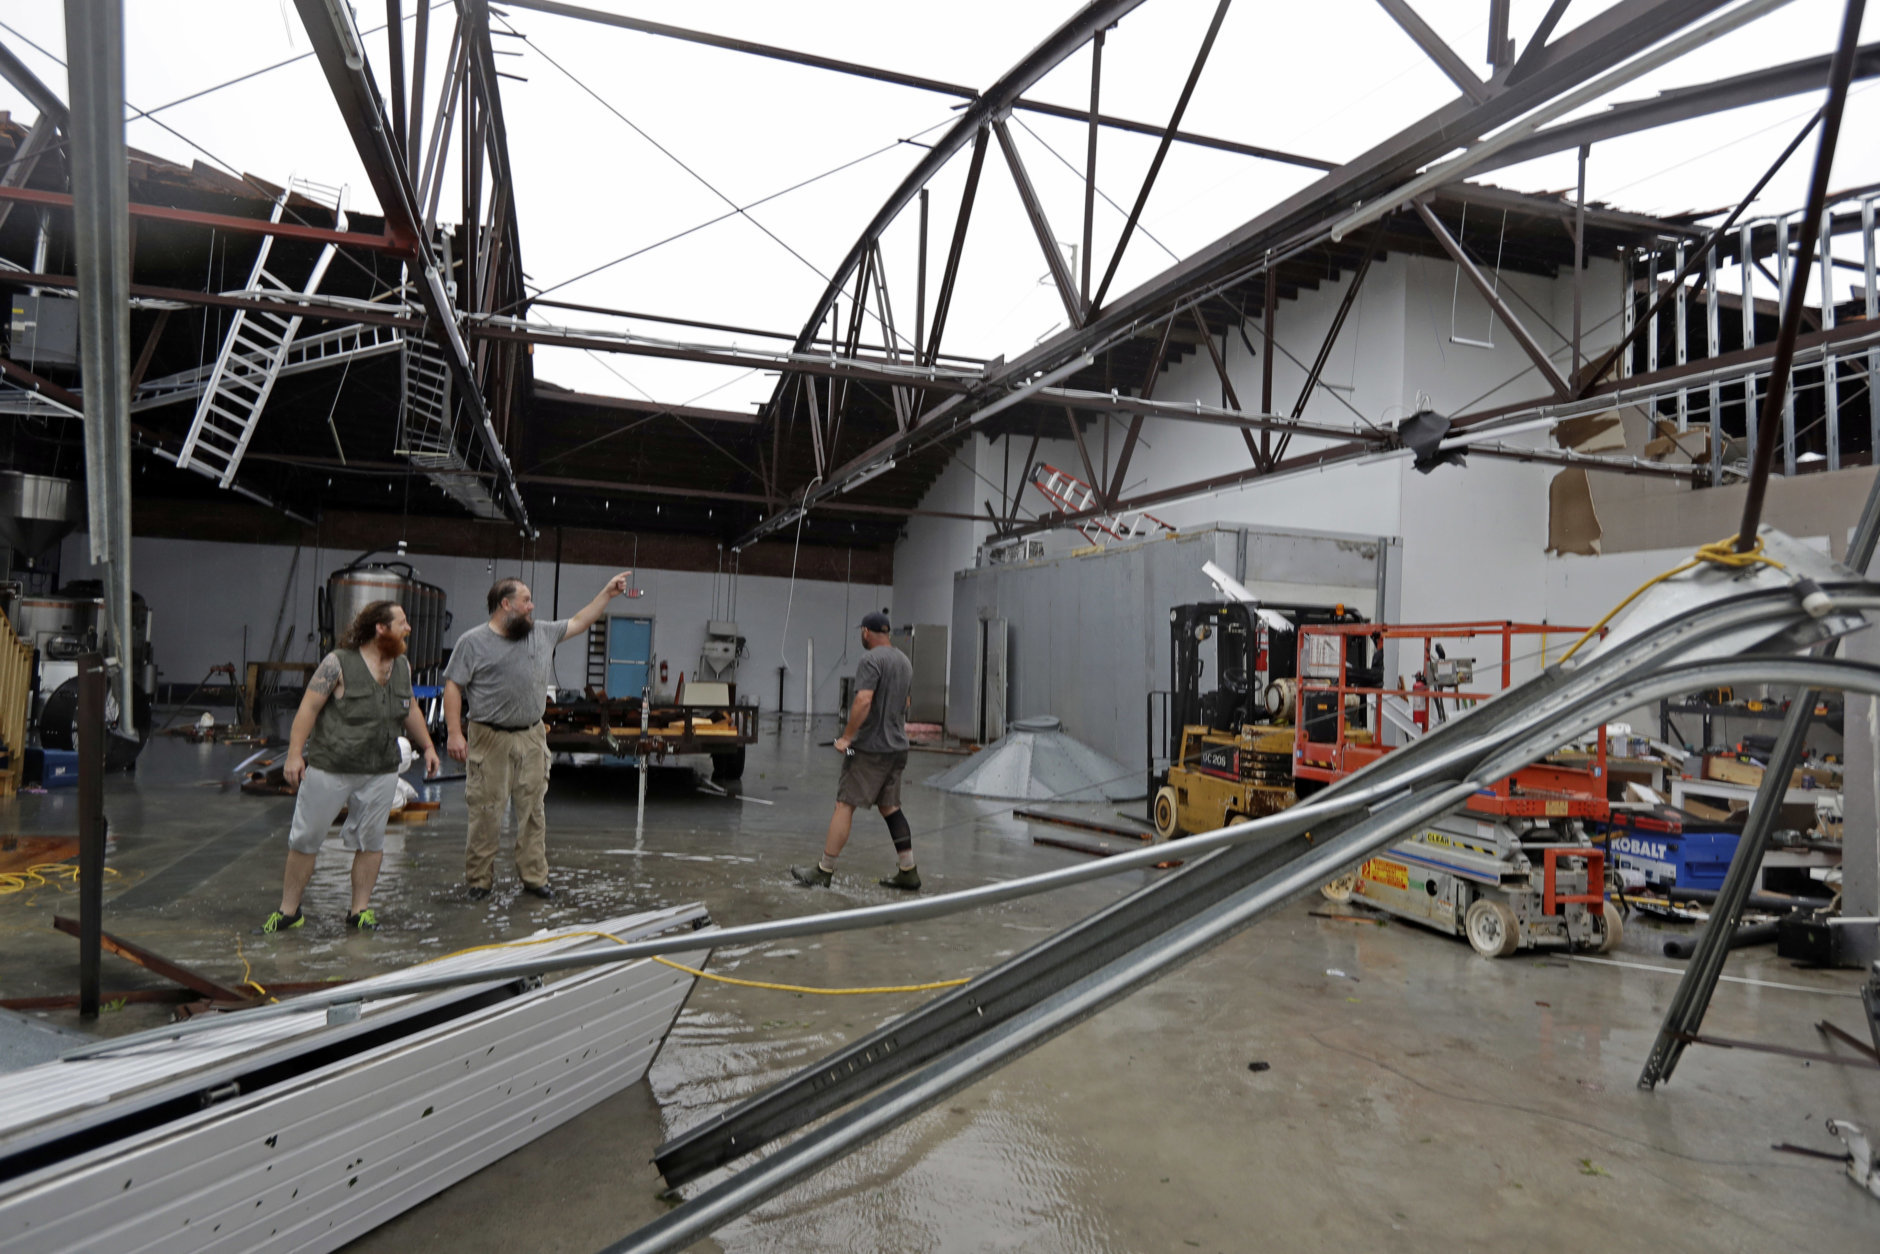 Ethan Hall, right, Michael Jenkins, center, and Nash Fralick, left, examine damage to Tidewater Brewing Co. in Wilmington, N.C., after Hurricane Florence made landfall Friday, Sept. 14, 2018. (AP Photo/Chuck Burton)